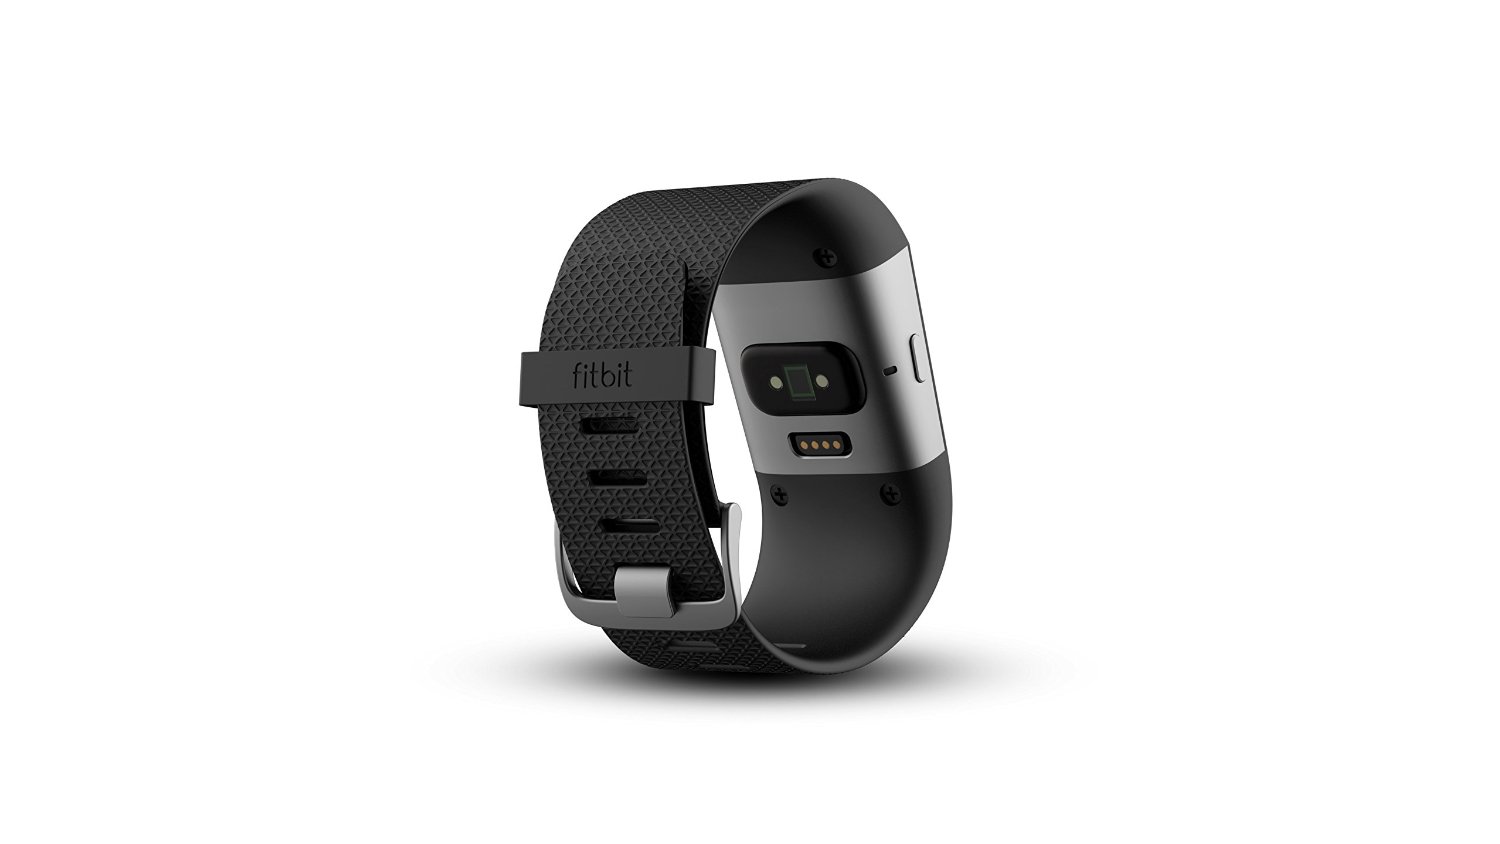 gps watch, running watch, fitbit, fitness tracker, activity tracker, fitbit surge, withings, fitbit alternatives, fitbit competitors